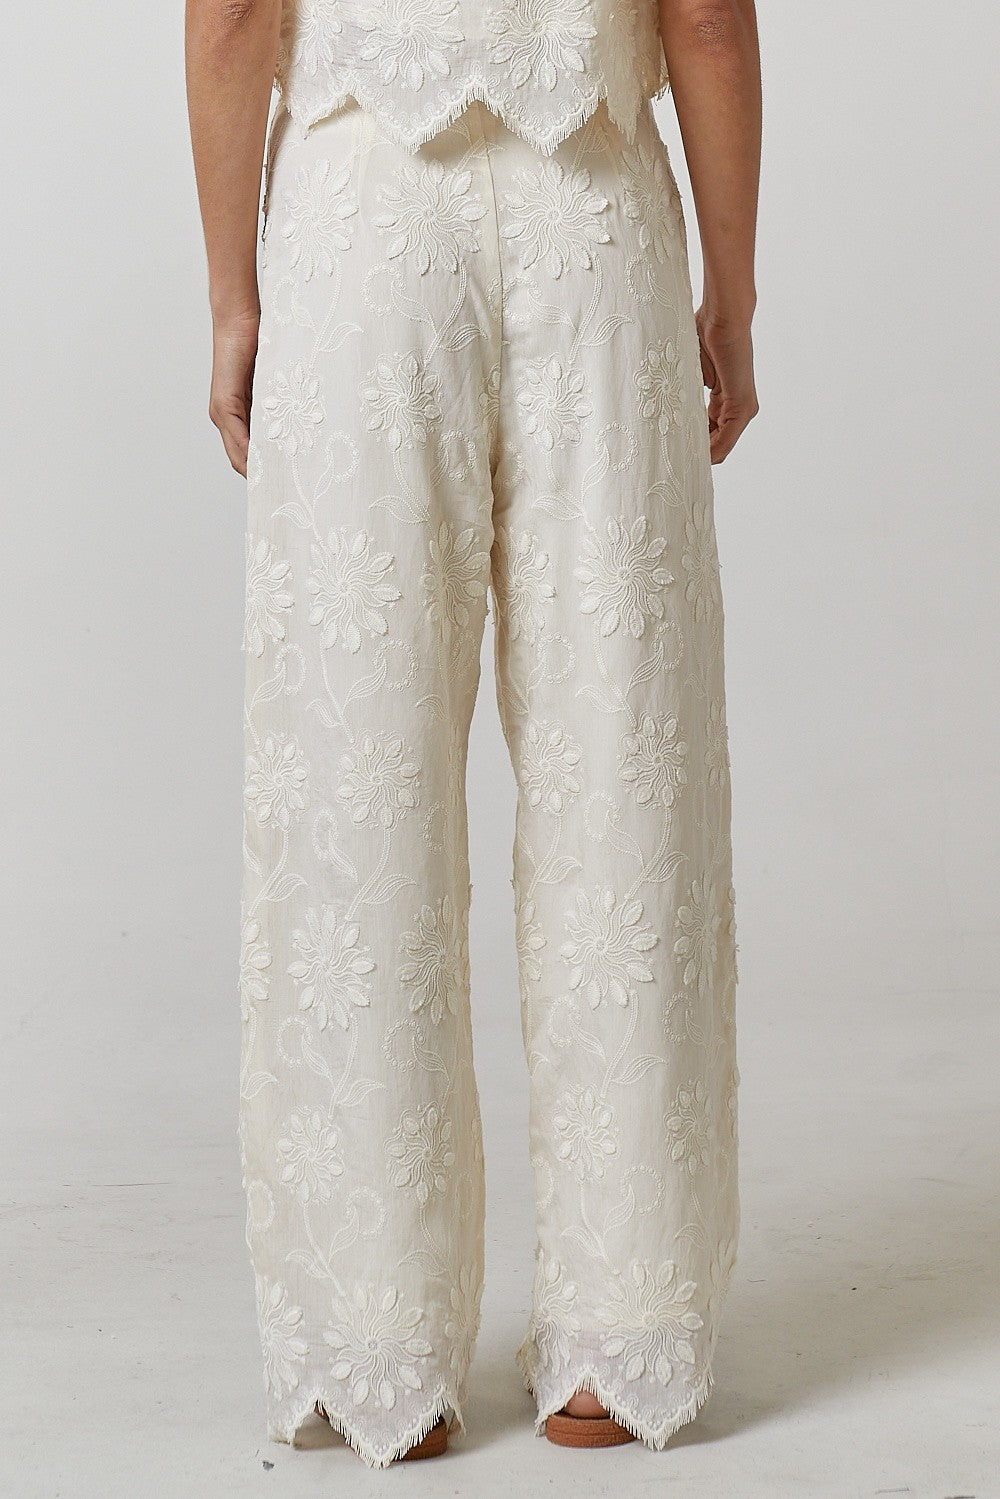 FLORAL EMBROIDERY TROUSER PANTS